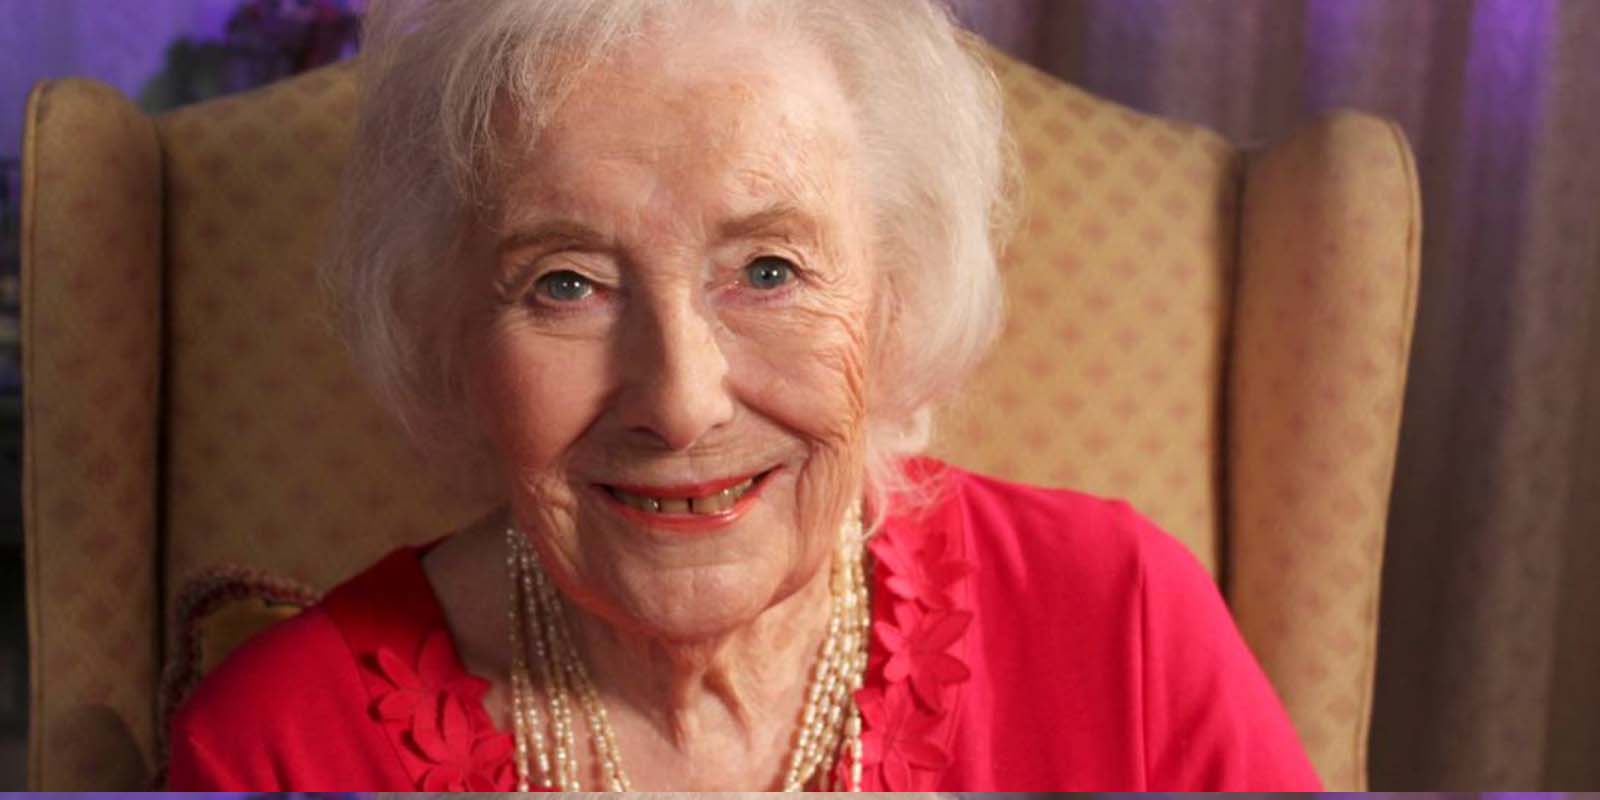 THE EXTRAORDINARY LIFE AND CAREER OF DAME VERA LYNN